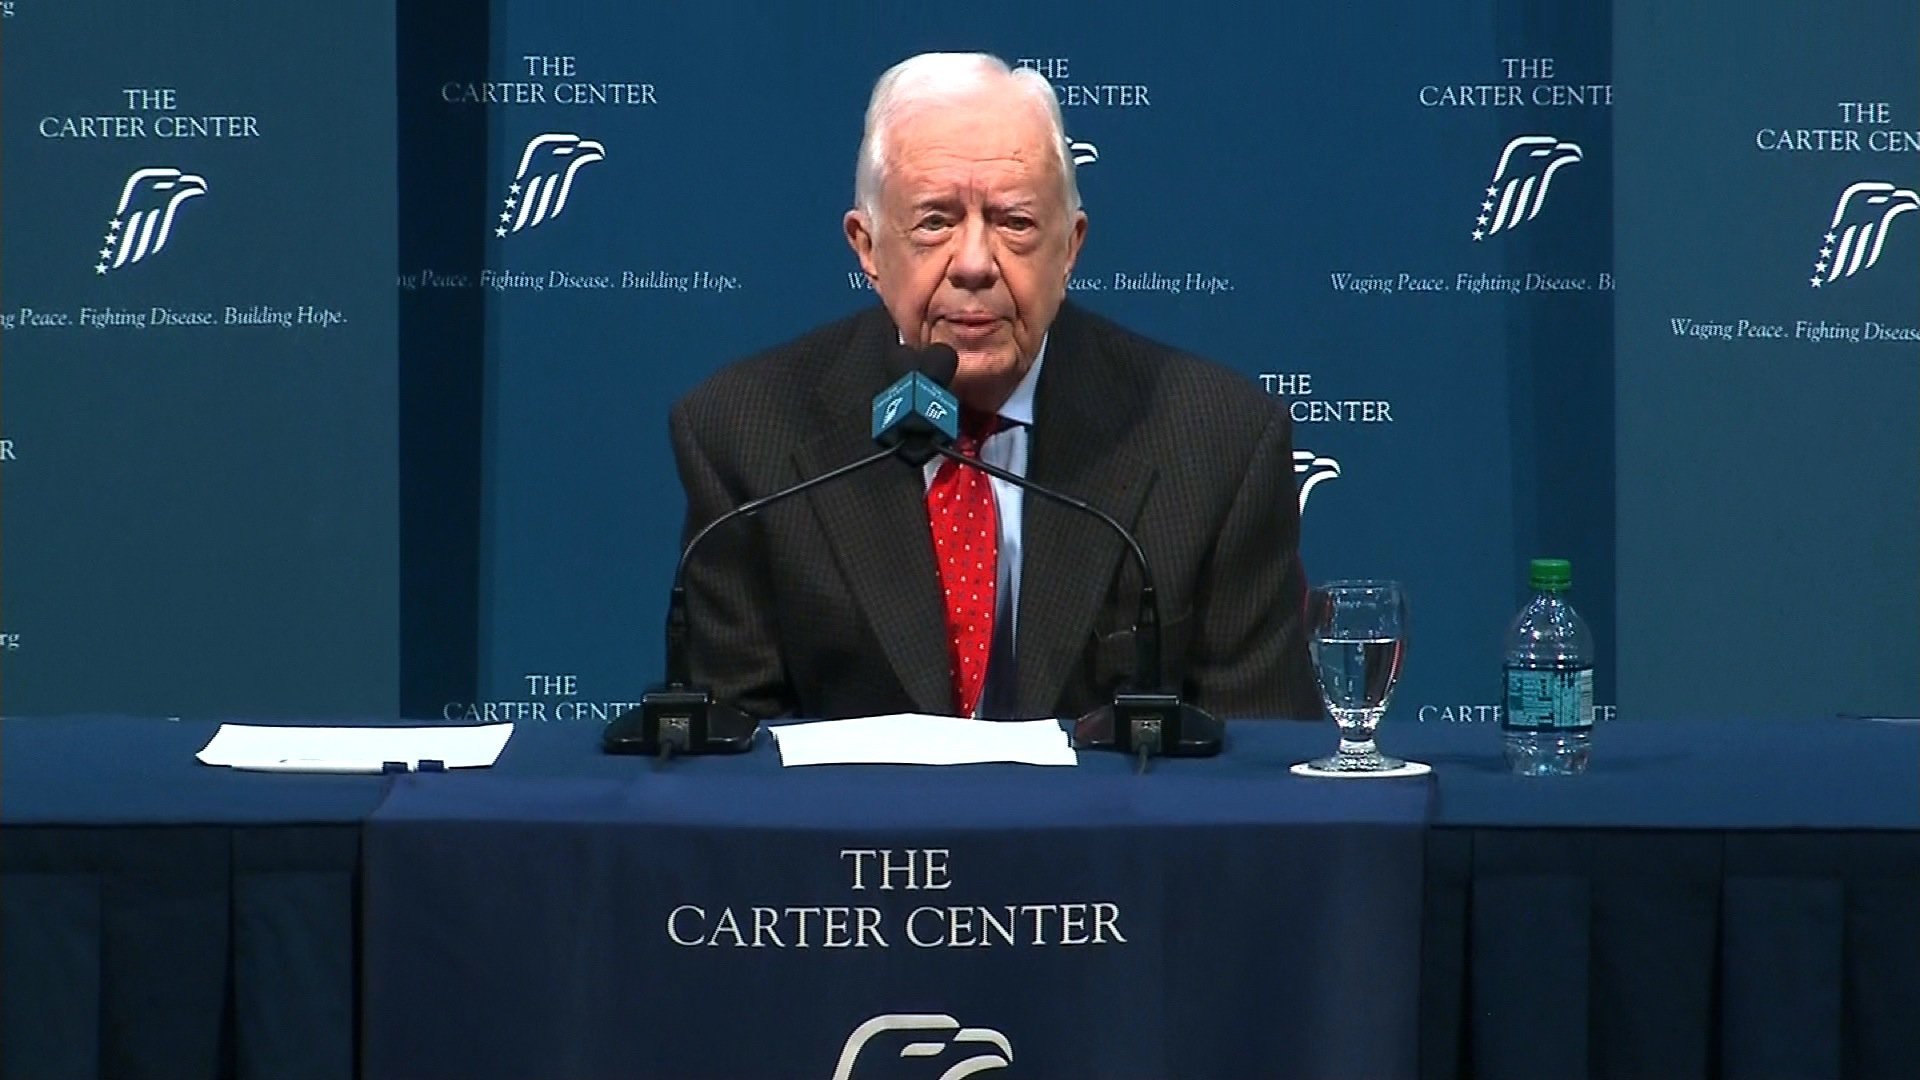 Former President Jimmy Carter said Thursday doctors found four spots of melanoma on his brain, describing his cancer diagnosis at a press conference in Atlanta. "I'll get my first radiation treatment this afternoon," Carter said, adding doctors began checking for more cancer after removing a spot from his liver.